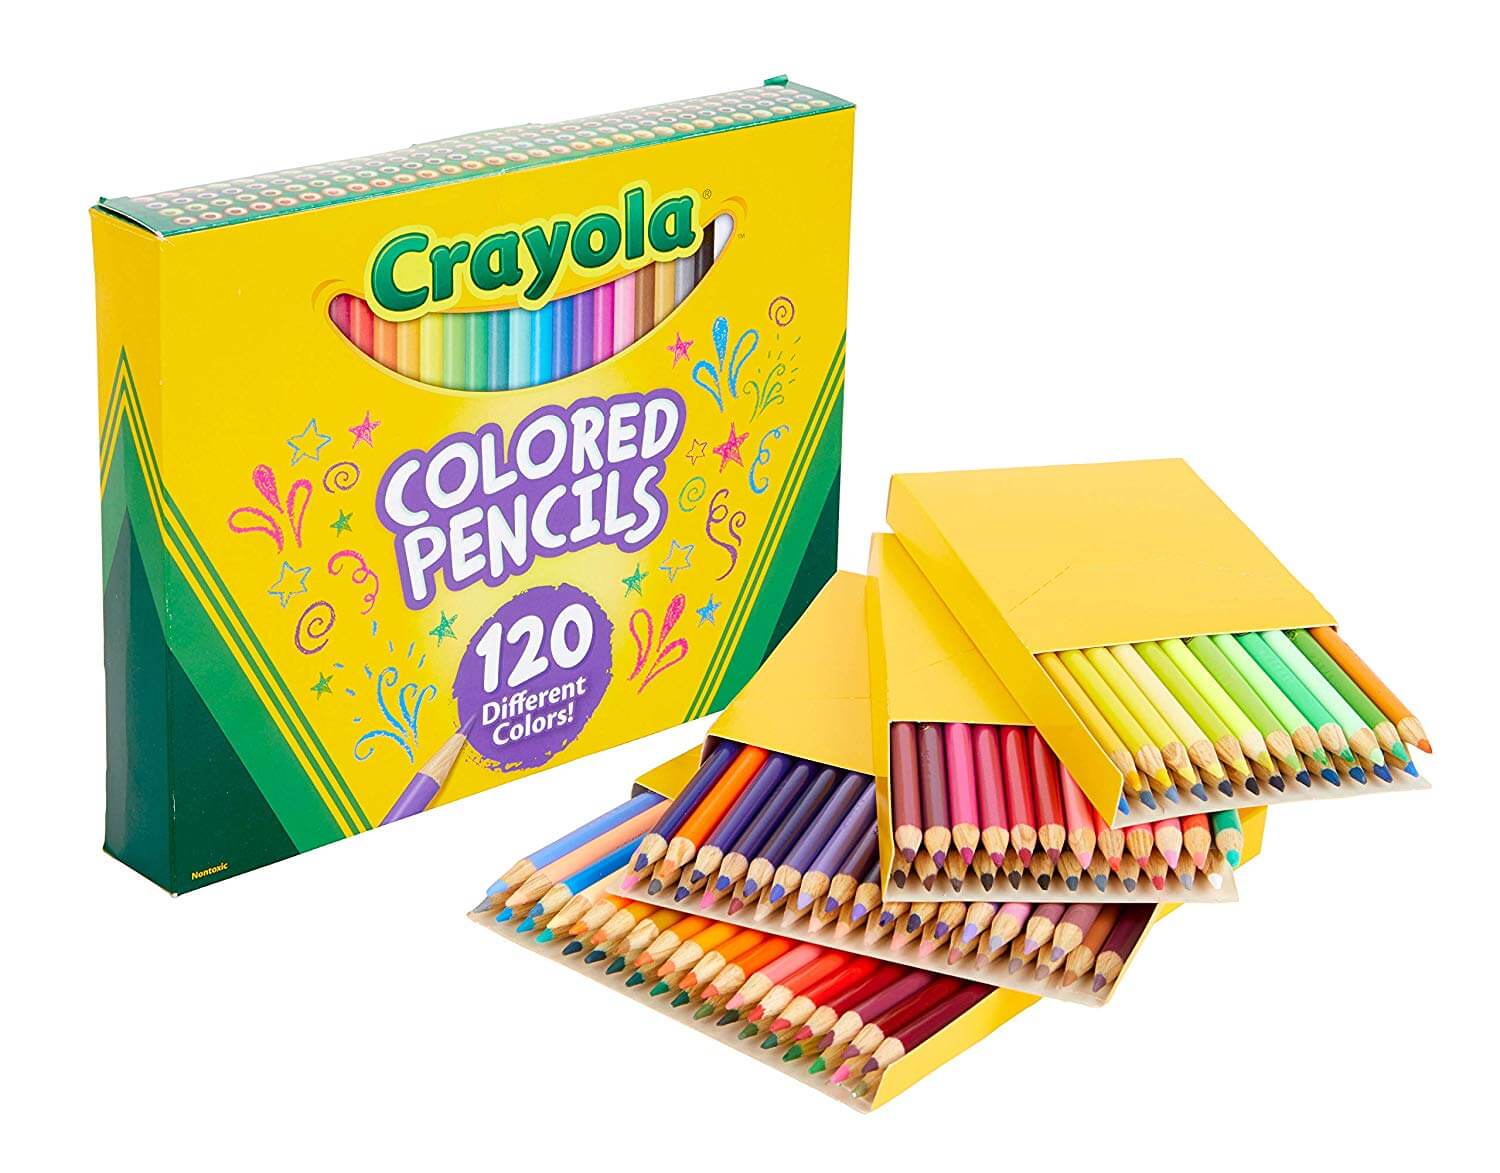 Crayola Colored Pencils - Best Supplies For Adult Coloring Blog